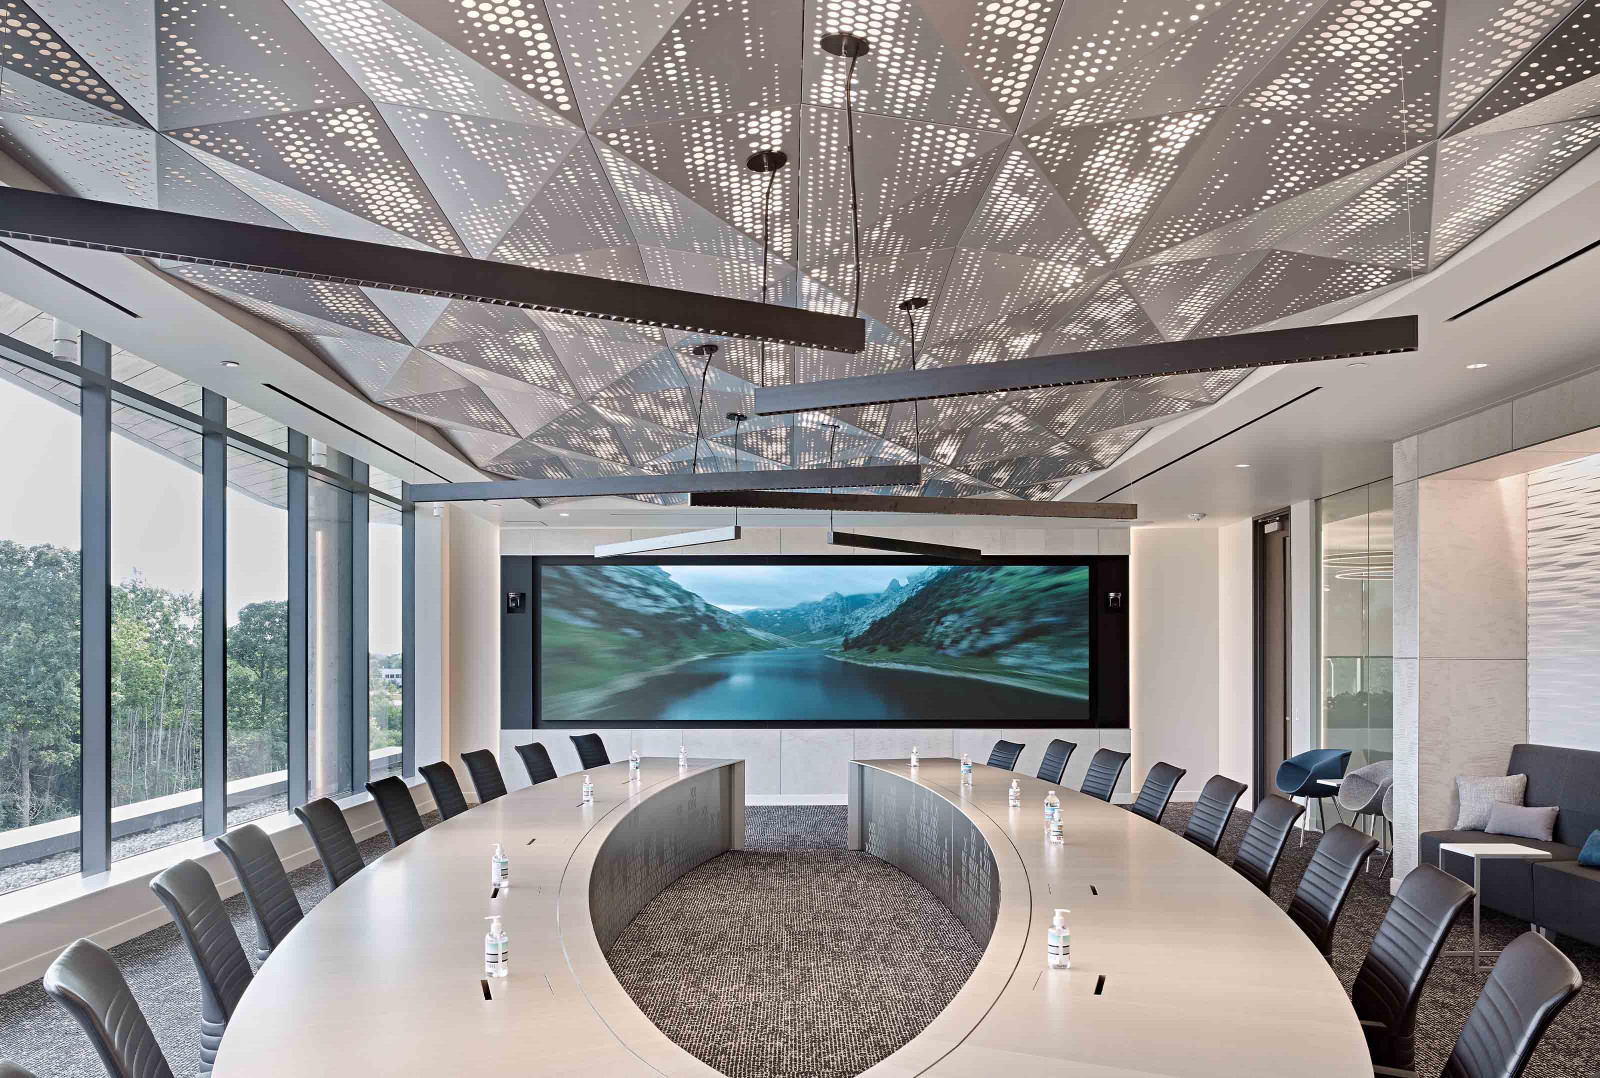 Utilize Two Sources of Light with One Embedded in a Geometrically Faceted Drop Ceiling